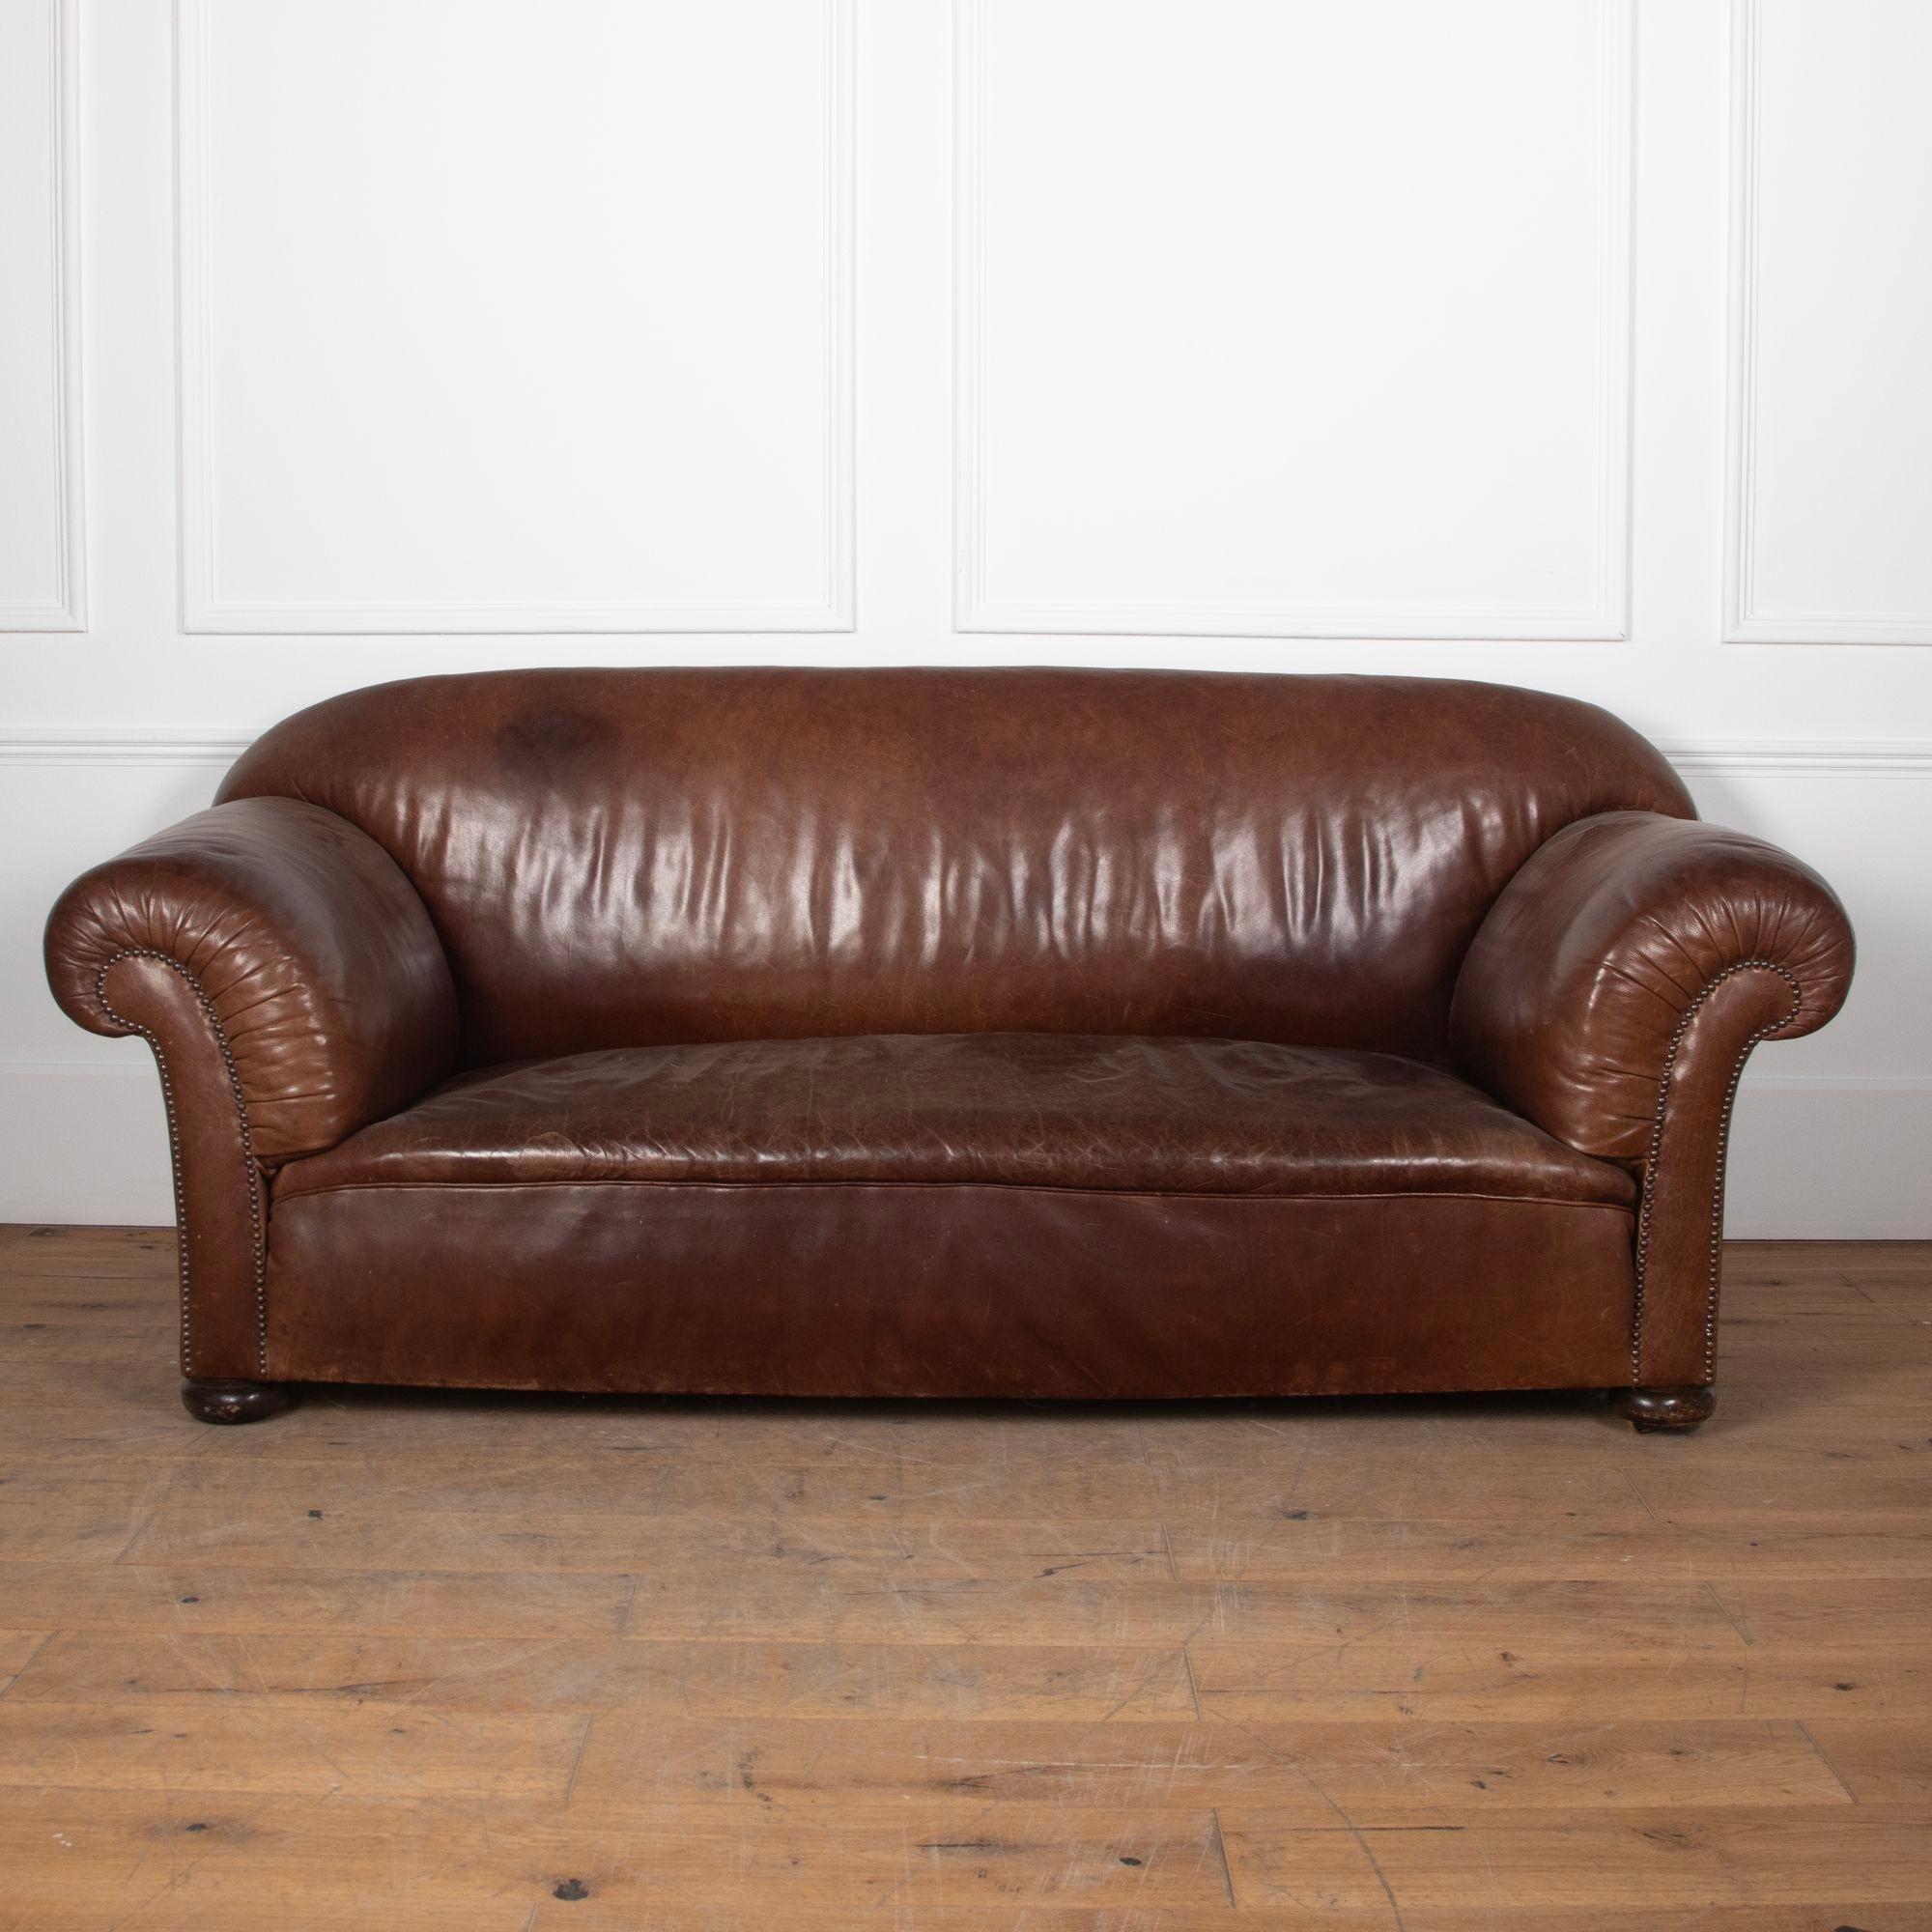 19th century Chesterfield sofa in leather by Maple & Co.
Circa 1890.